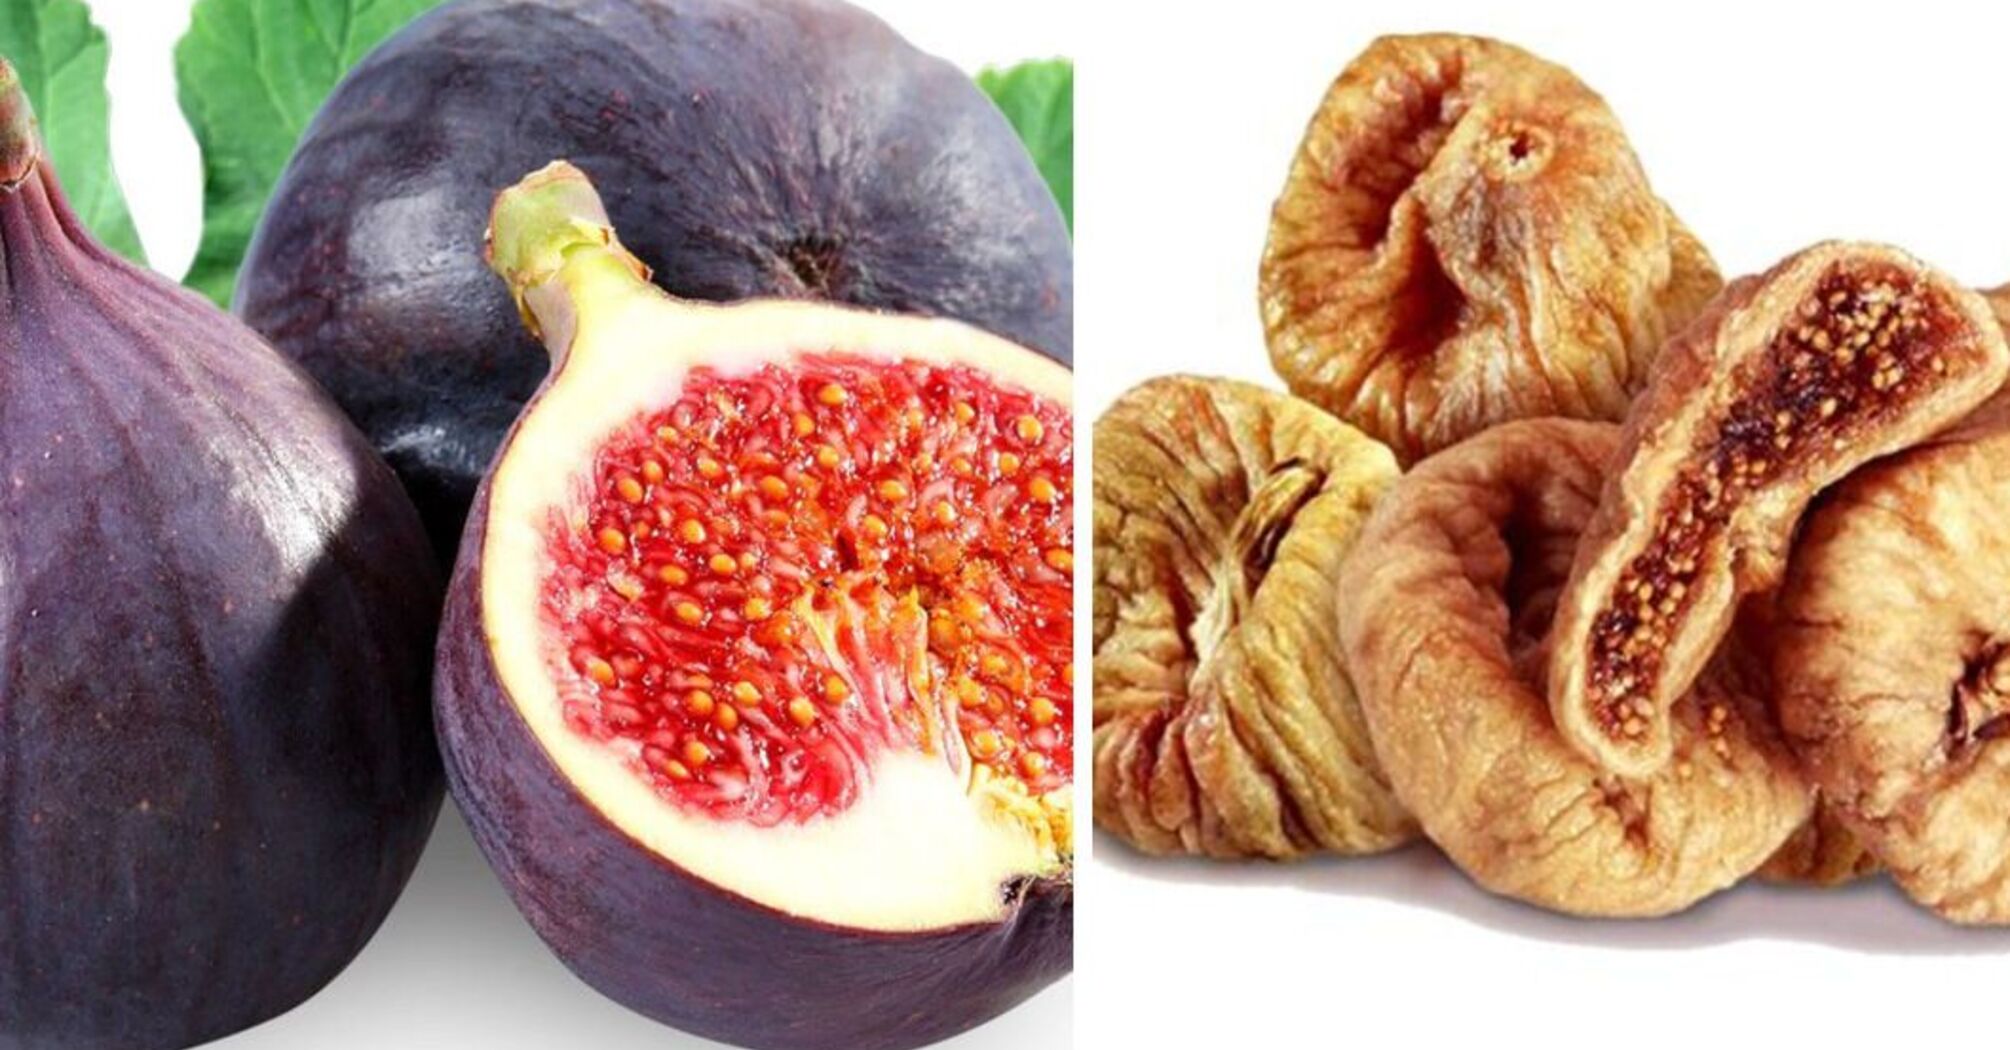 Healthy figs: why such an important product is underestimated in our country